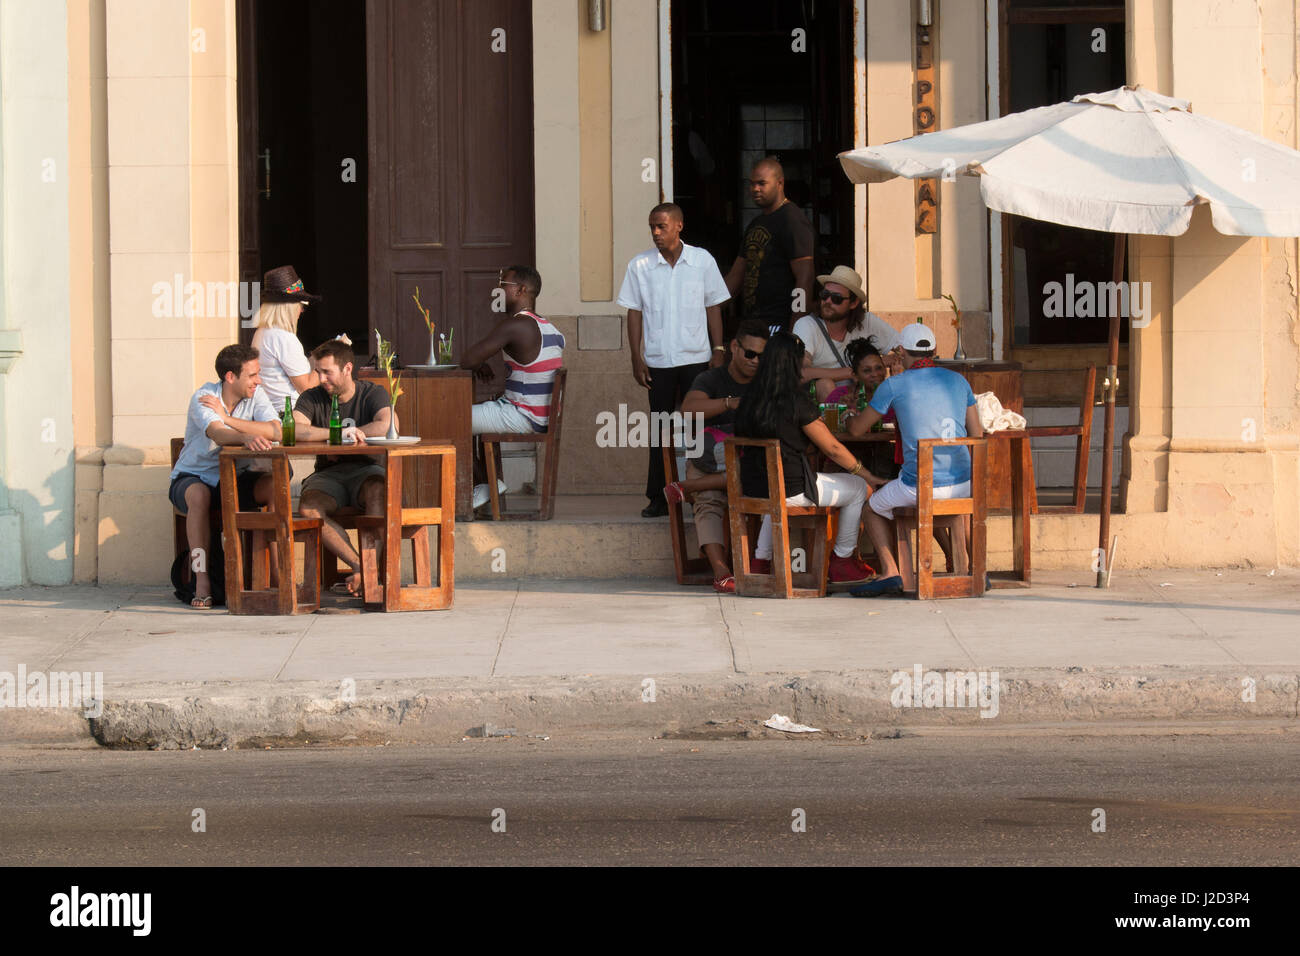 Havana Street scenes and Malecon promenade. Vintage cars, pedicabs and pedestrians share the route. Patrons at a cafe. (Editorial Use Only) Stock Photo